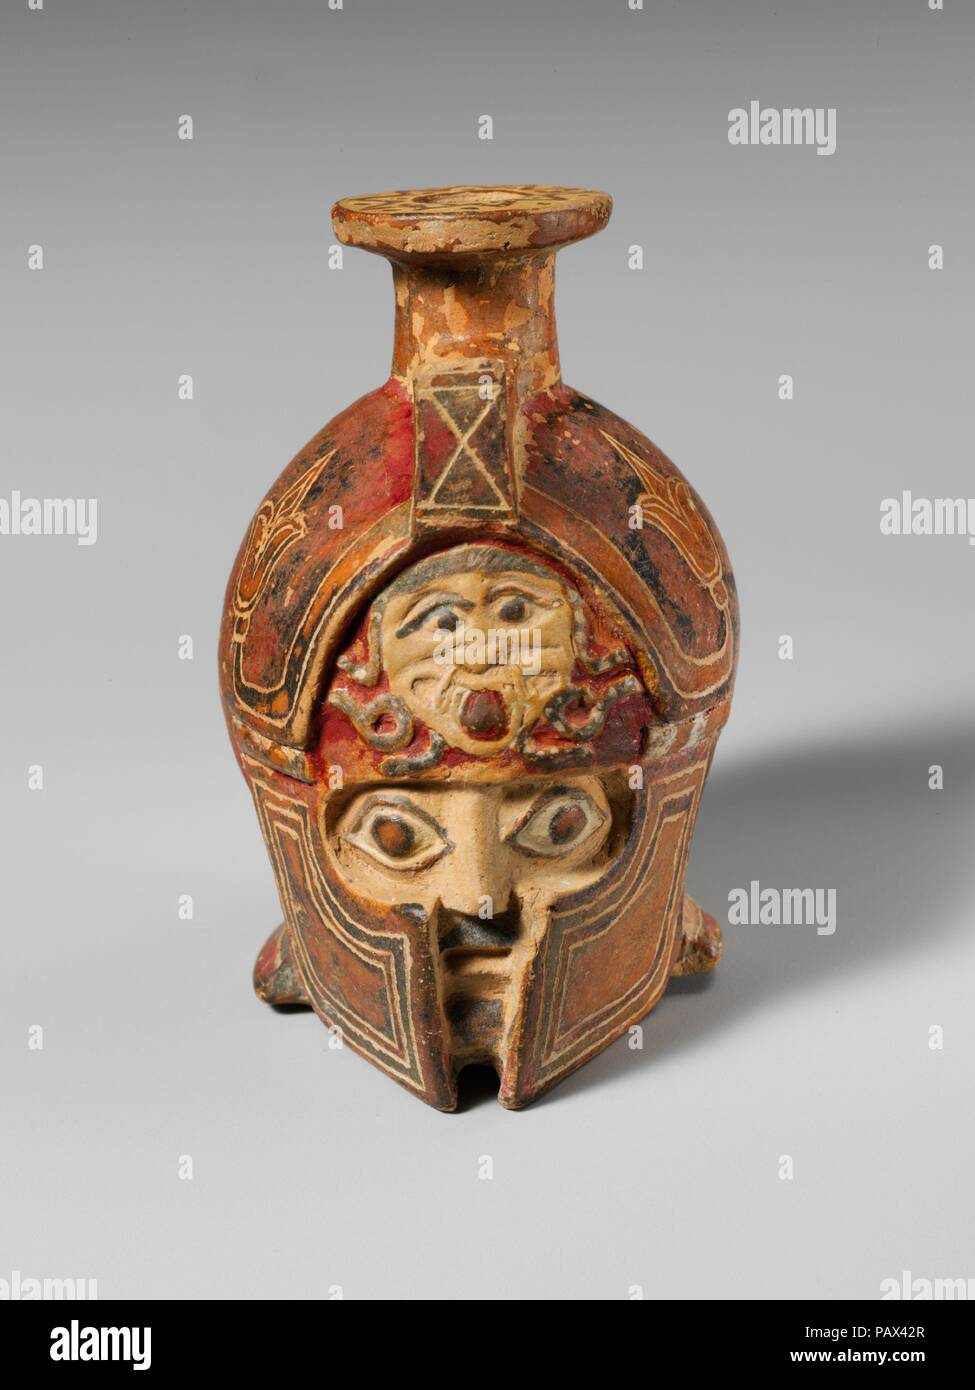 Terracotta aryballos in the form of a helmeted head. Culture: East Greek. Dimensions: H. 7.01 cm.. Date: ca. 600-575 B.C..  A helmeted warrior's head makes up the body of this small mold-made terracotta aryballos, likely used to hold perfumed oil. The painted and incised surface is very well preserved, including a prominent gorgoneion on the metopon of the Ionian helmet. The warrior's wide eyes and dark beard are visible through the gaps in the helmet. Museum: Metropolitan Museum of Art, New York, USA. Stock Photo